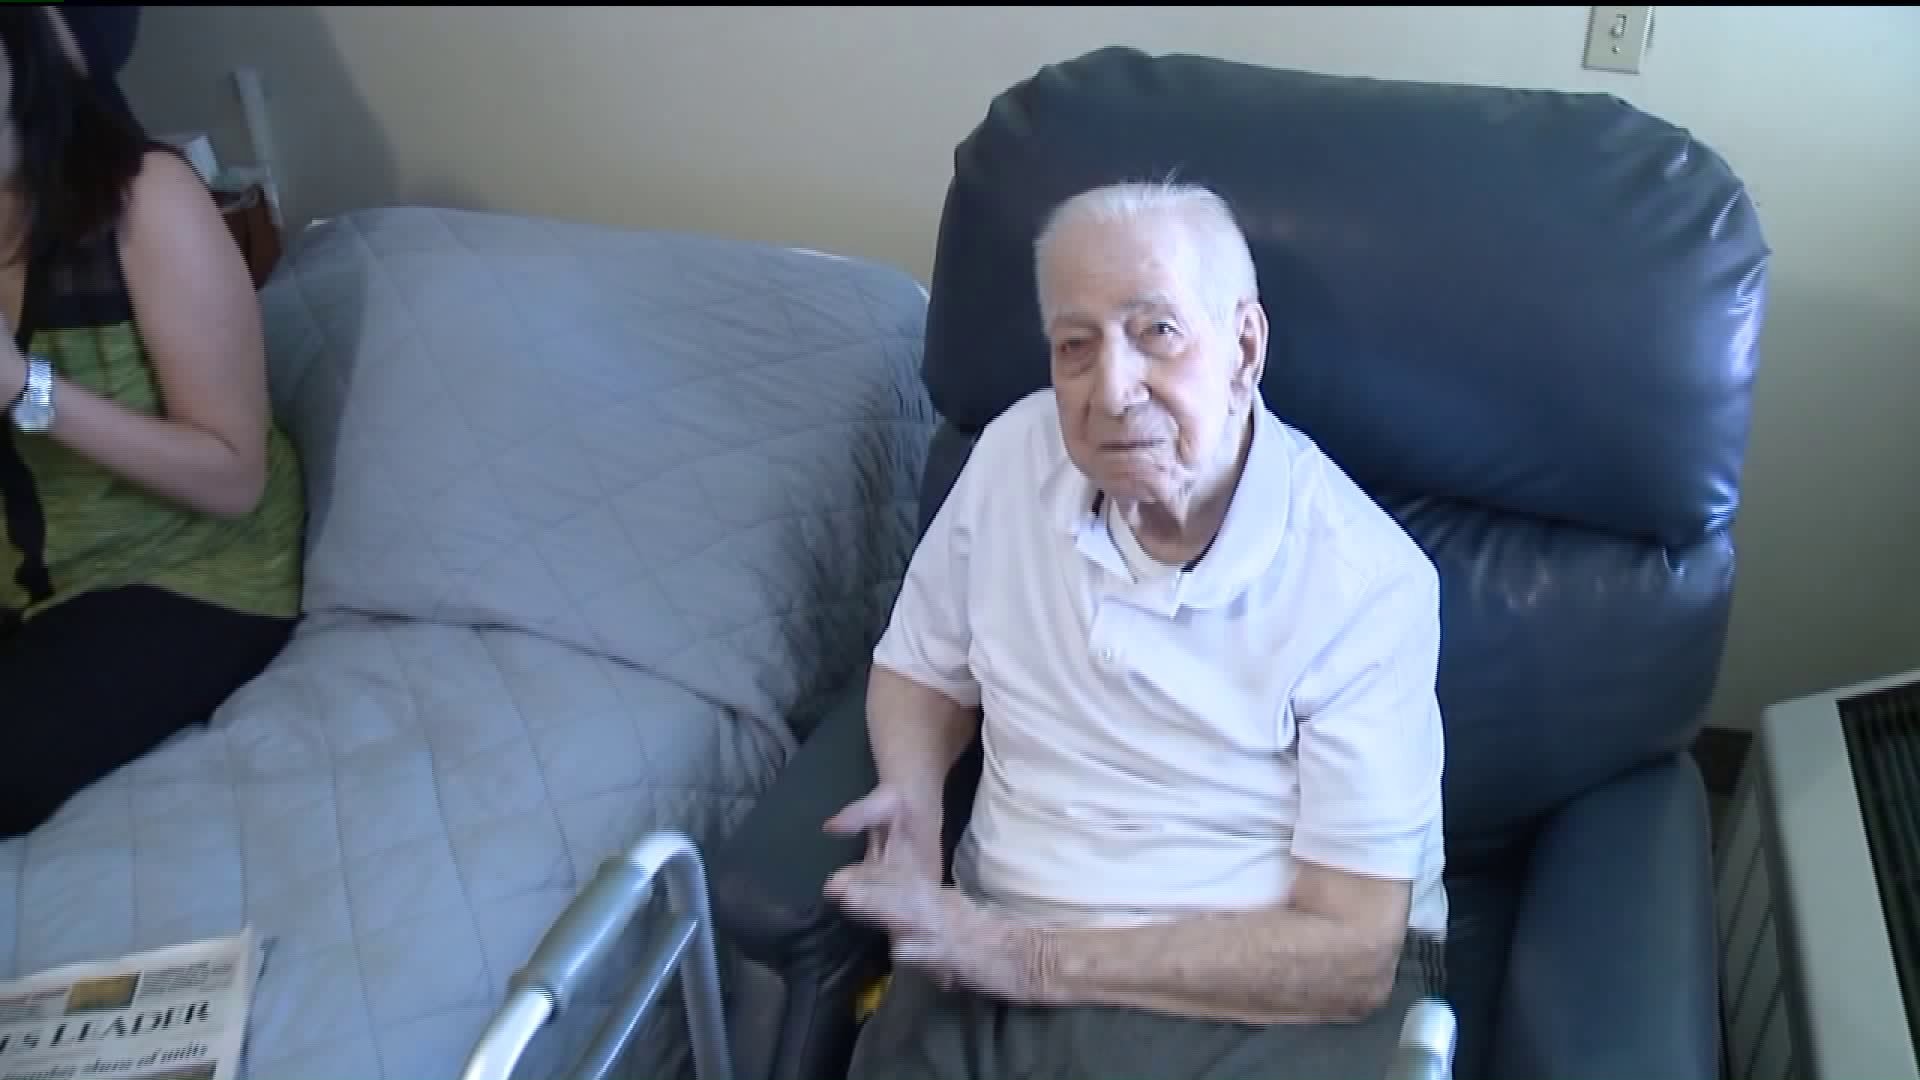 World War II Army Vet Turns 102, Shares His Secret to Long and Happy Life